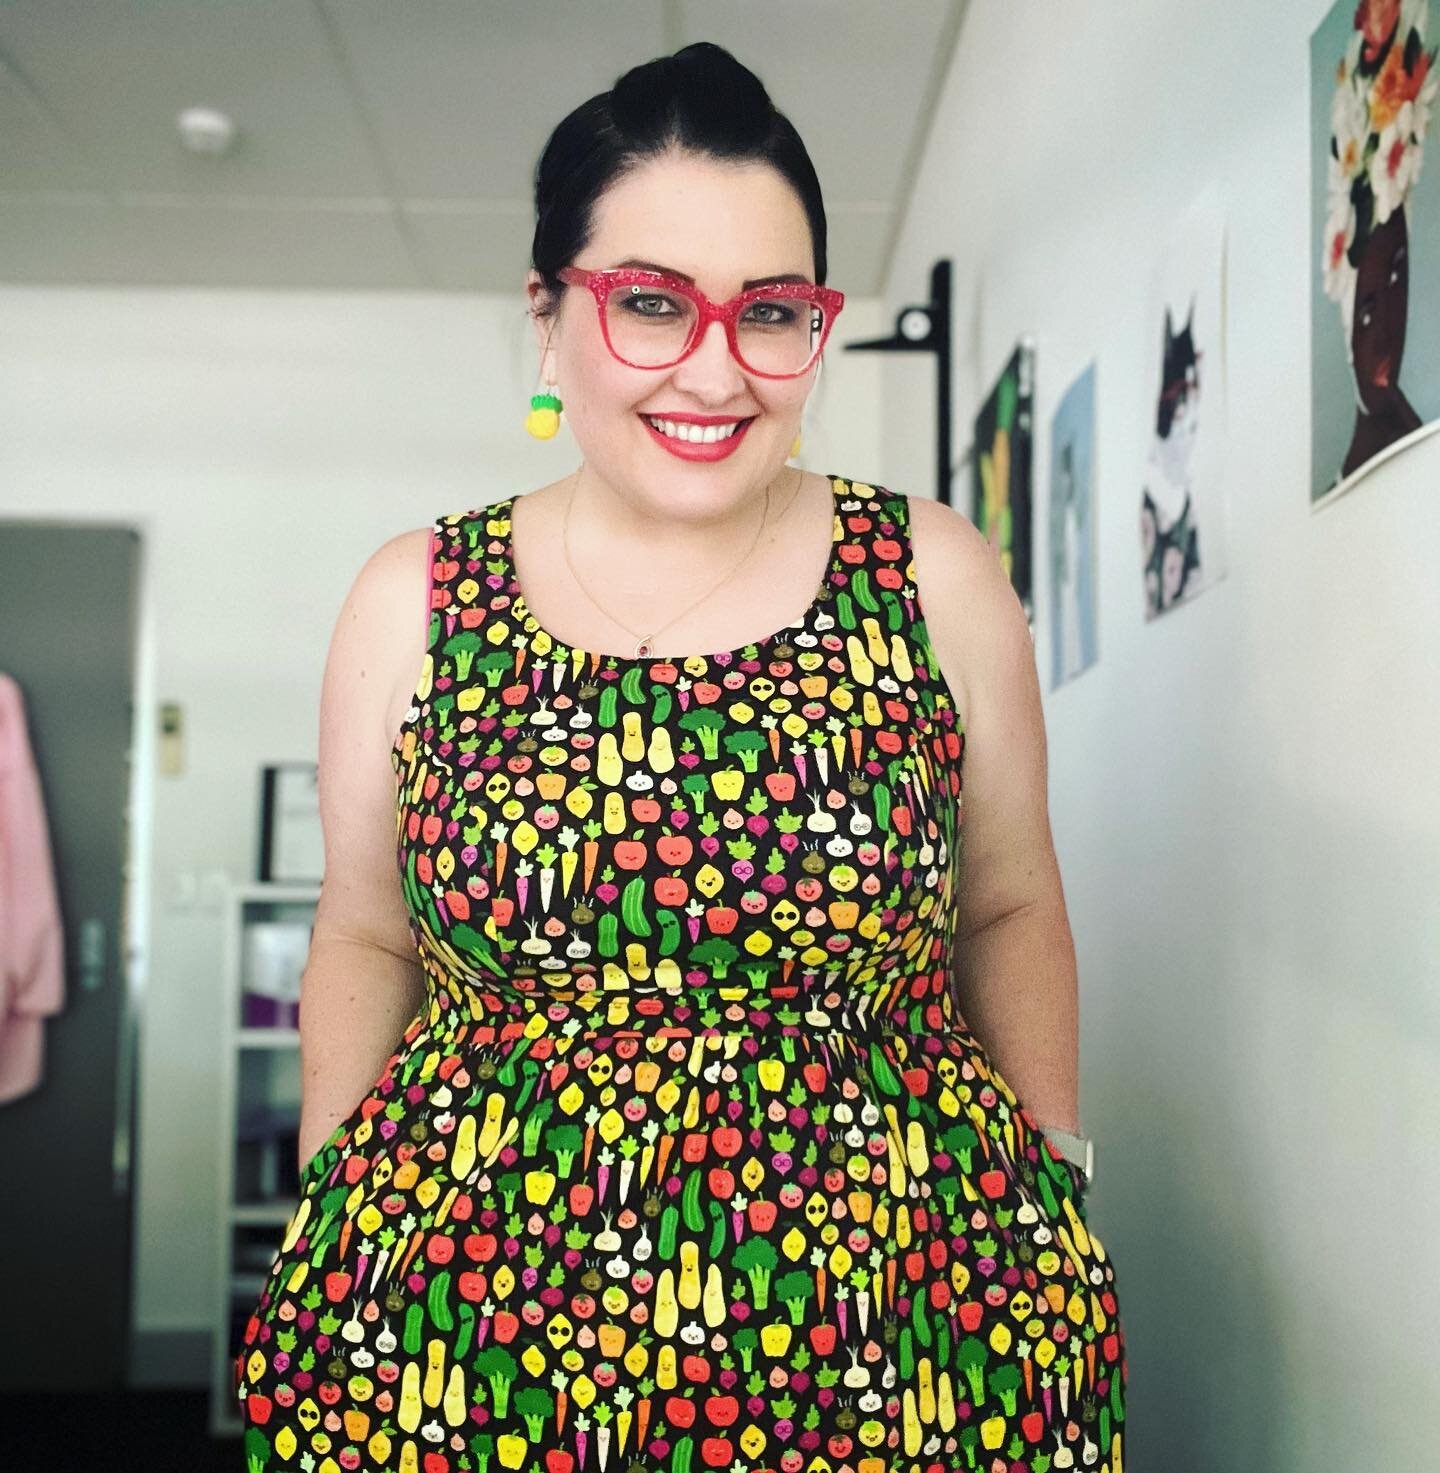 It&rsquo;s been a hectic #fruityfriday for me! I&rsquo;m grateful for bite sized &amp; handbag friendly fruits today! 

Image: Selfie of me, wearing a black dress with fruit &amp; veg with little emoji like faces. Specs are red with glitter, hair is 